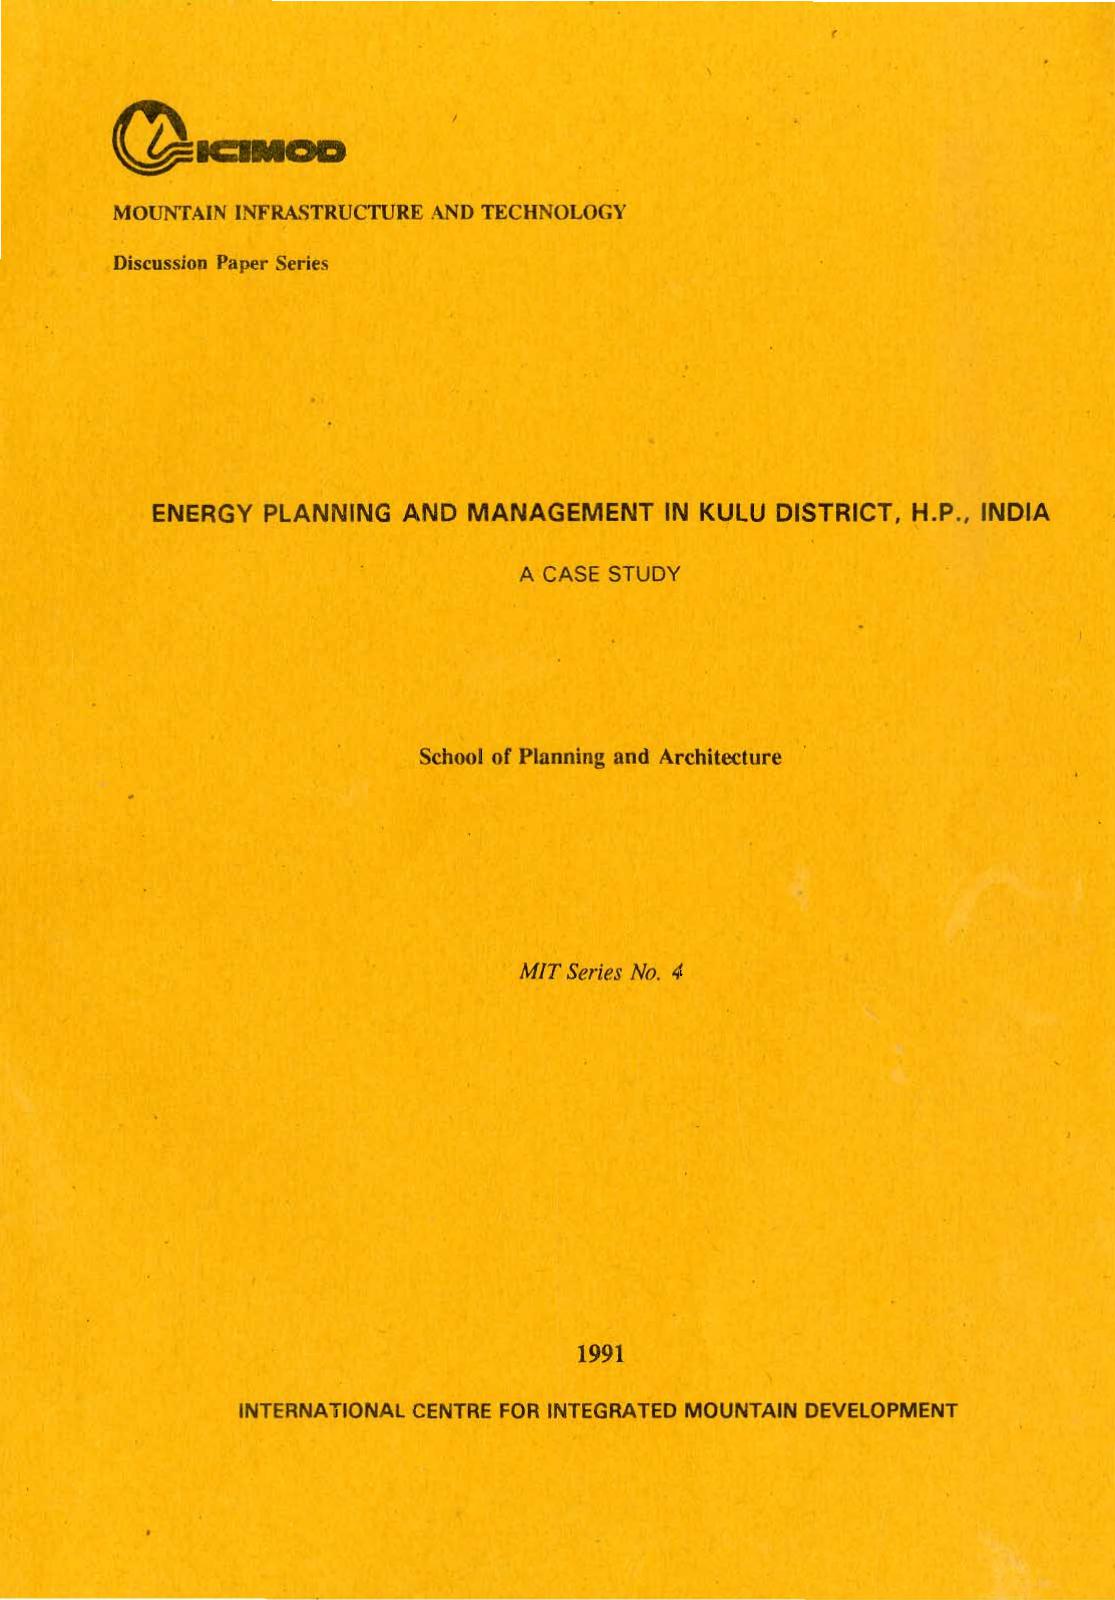 Energy Planning And Management In Kalu District, H.P. India; A Case Study